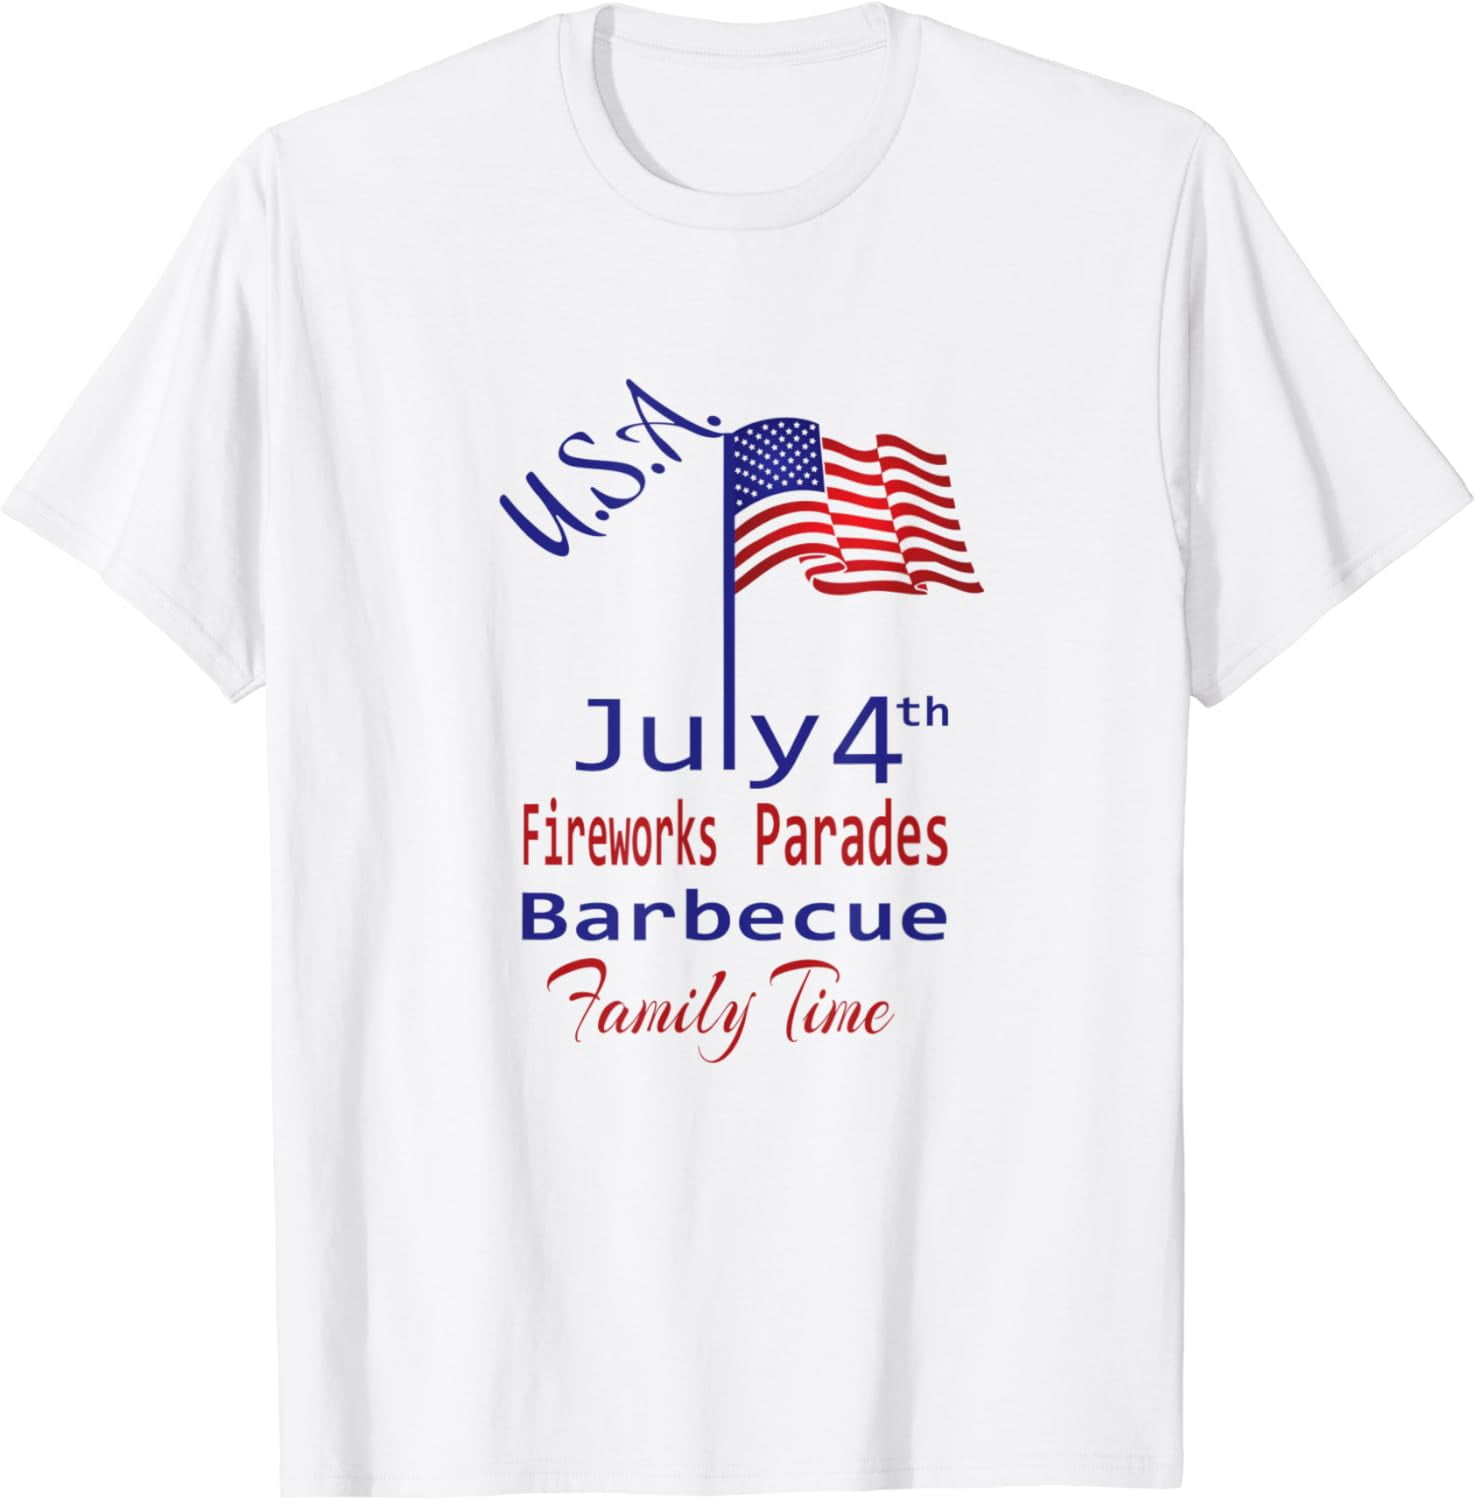 4th of July Independence Day Parades FireWorks Barbecue T-Shirt ...